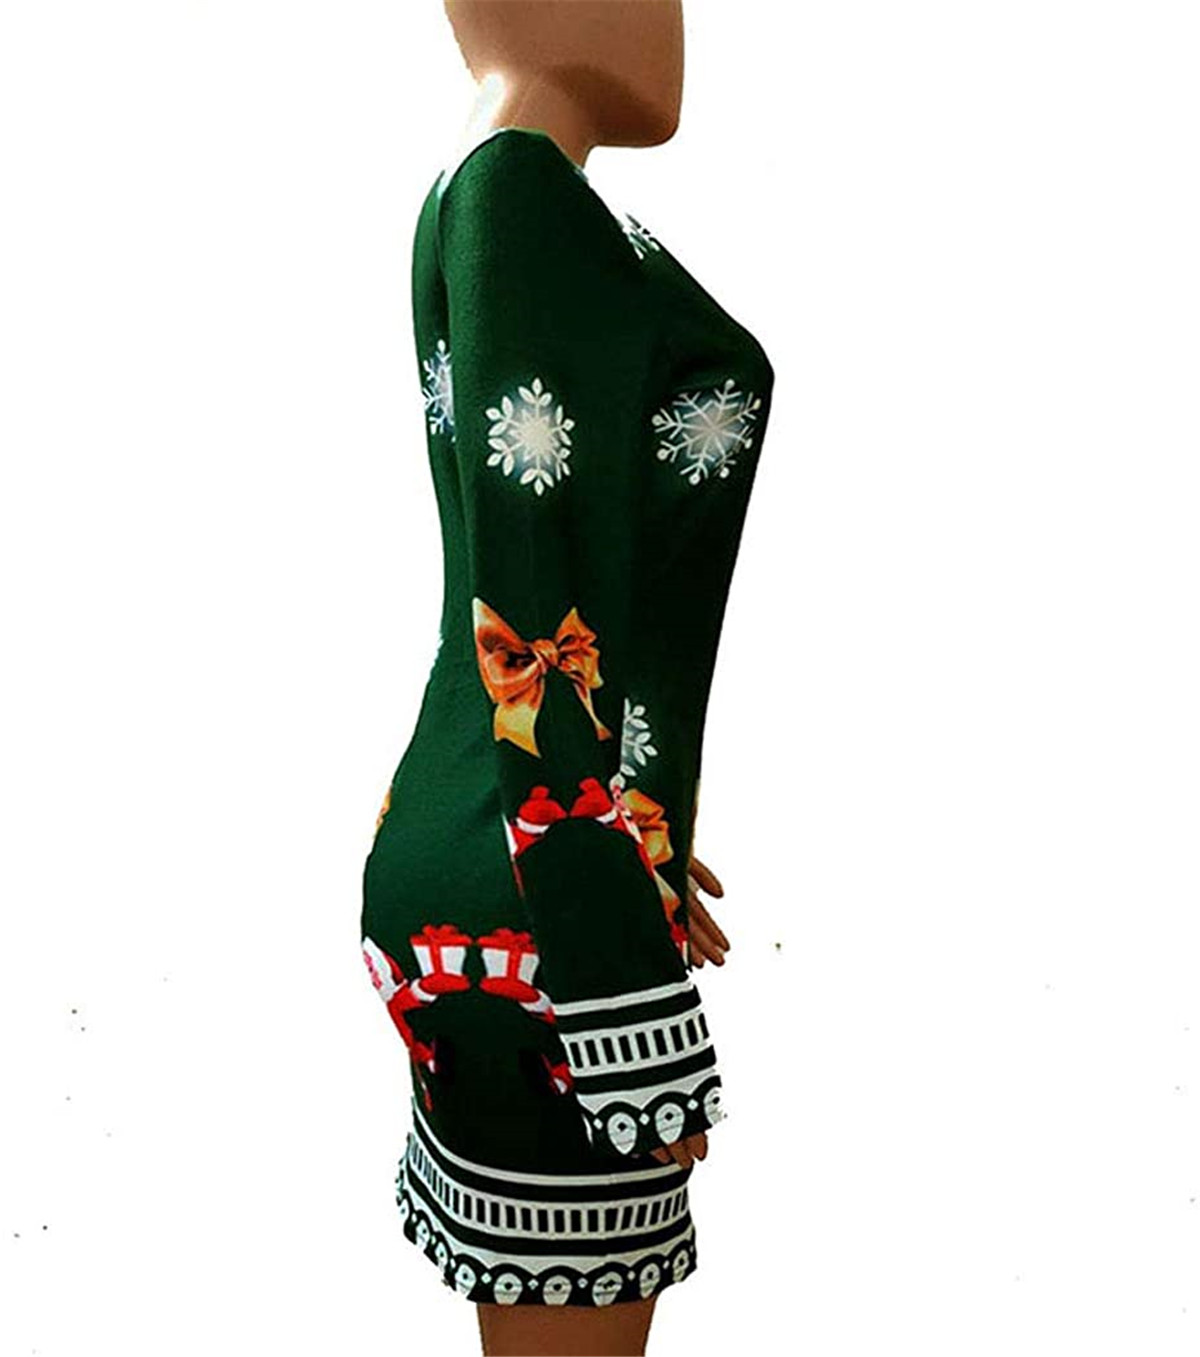 Kiapeise Kiapeise Women Ugly Christmas Sweater Dress Themed Print Long Sleeve Round Neck Dress Fall and Winter Clothes - image 5 of 6